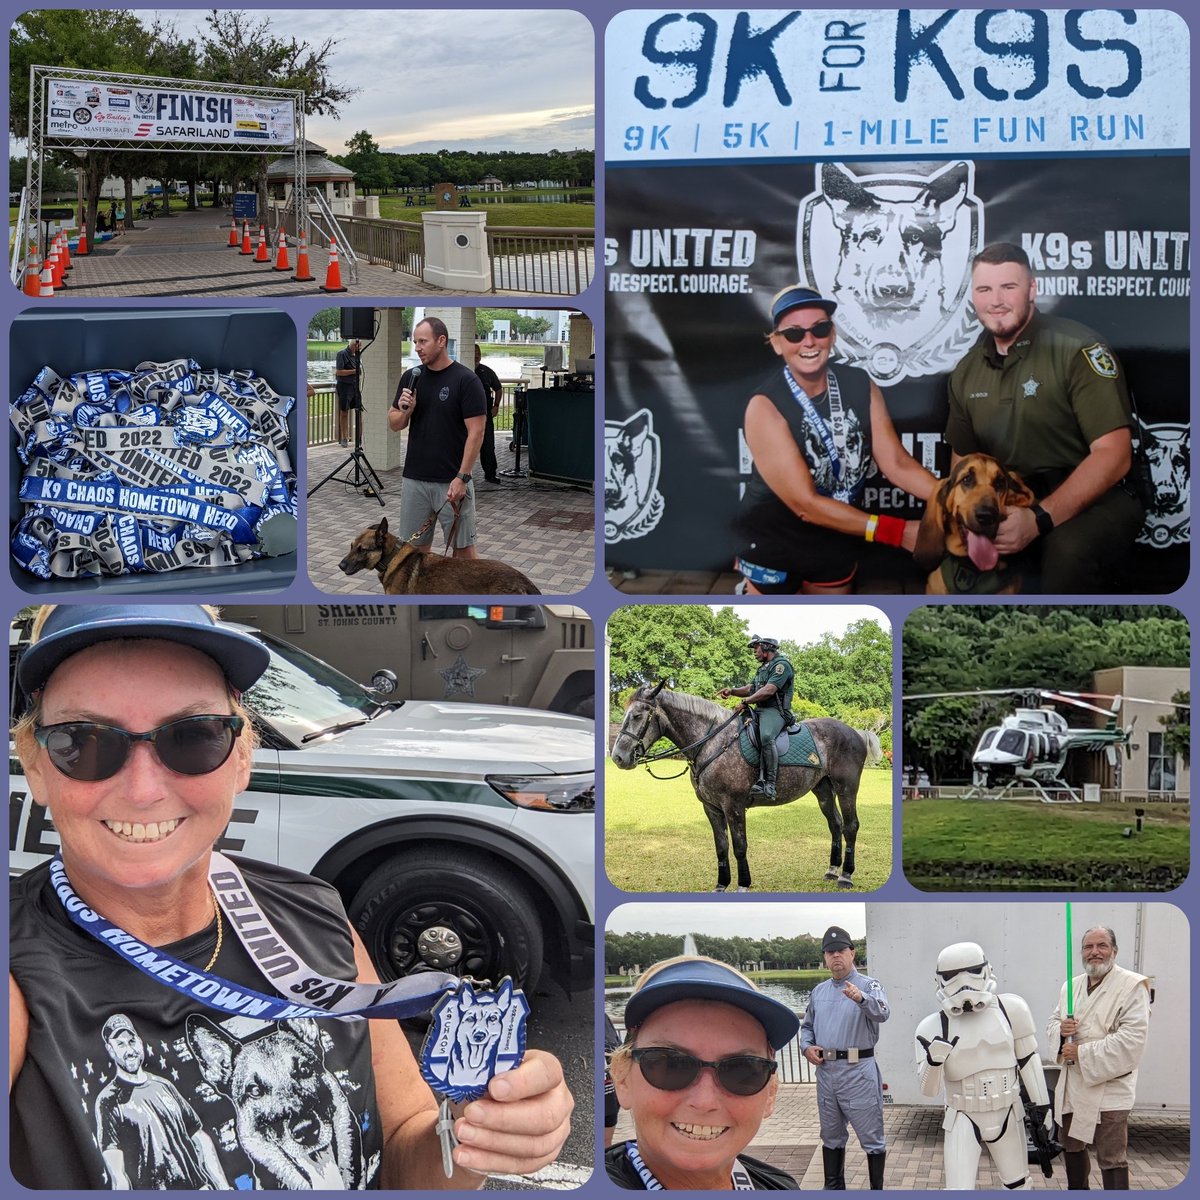 Doggone awesome morning at @K9sUnited #5k at #worldgolfvillage #staugustine this morning! 🏃‍♀️🐕‍🦺😎 Best 5k time in a while 👍 Even got this K9 to sit for the photo 🐕‍🦺 #running #fitness #k9sunited